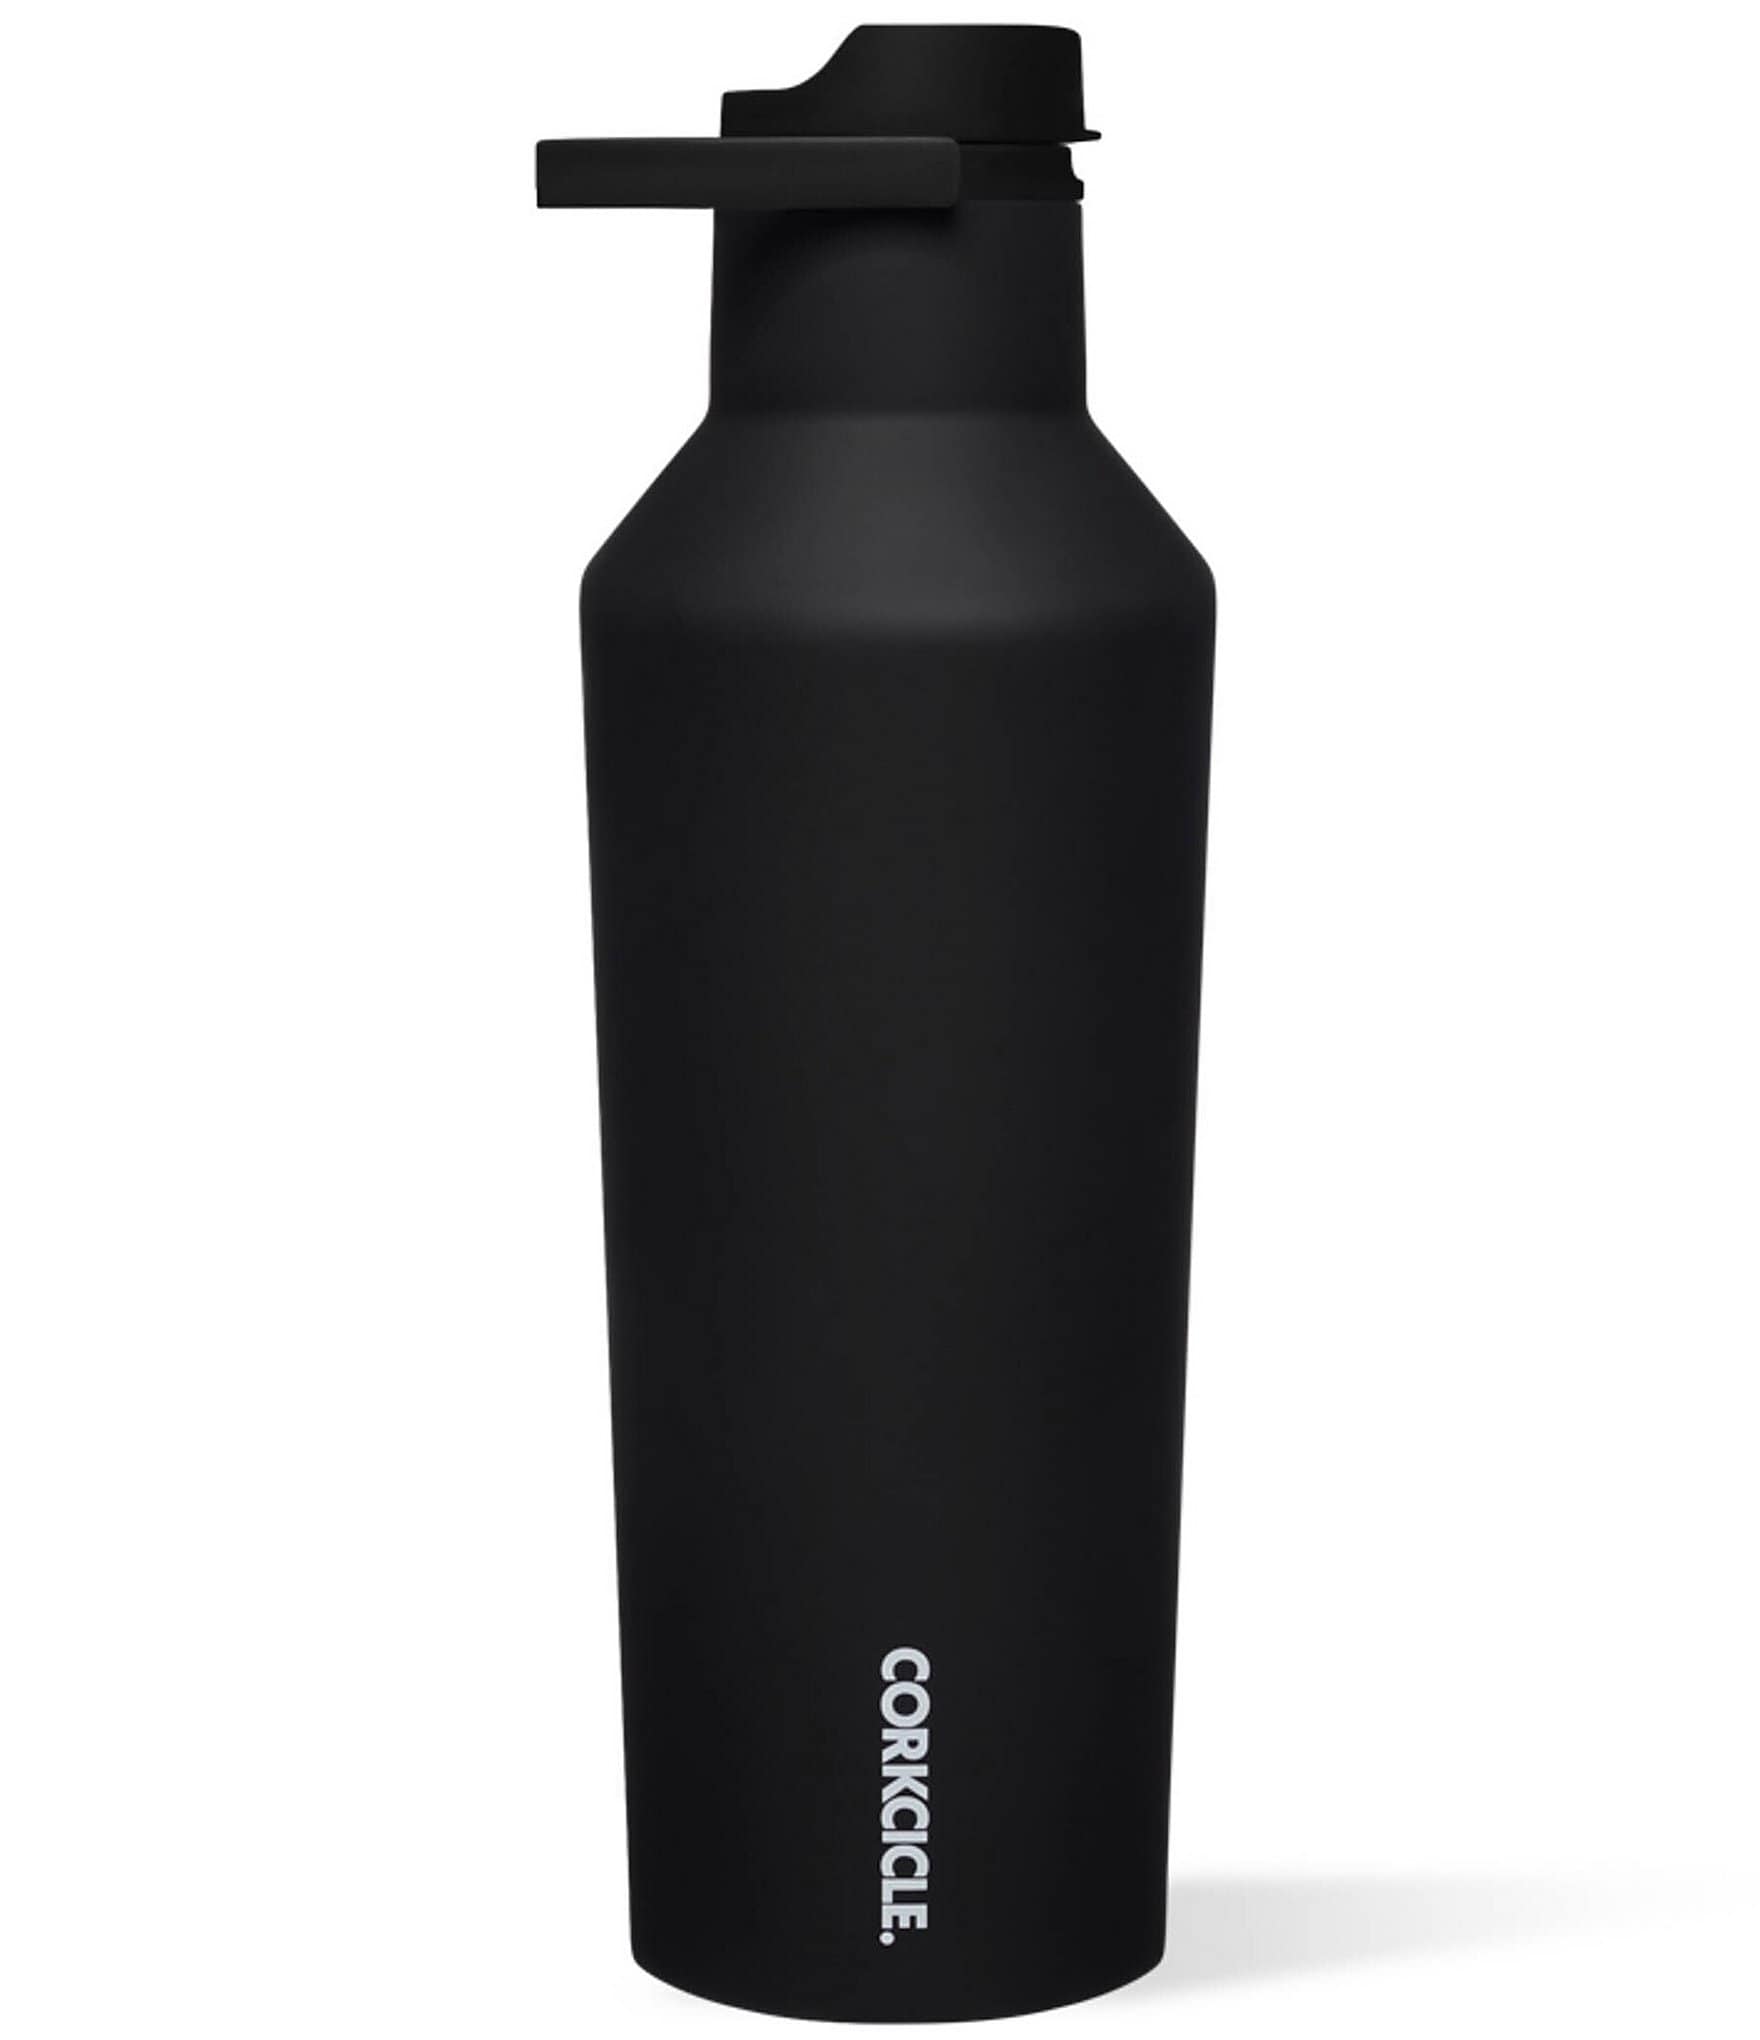 Corkcicle Insulated Water Bottles